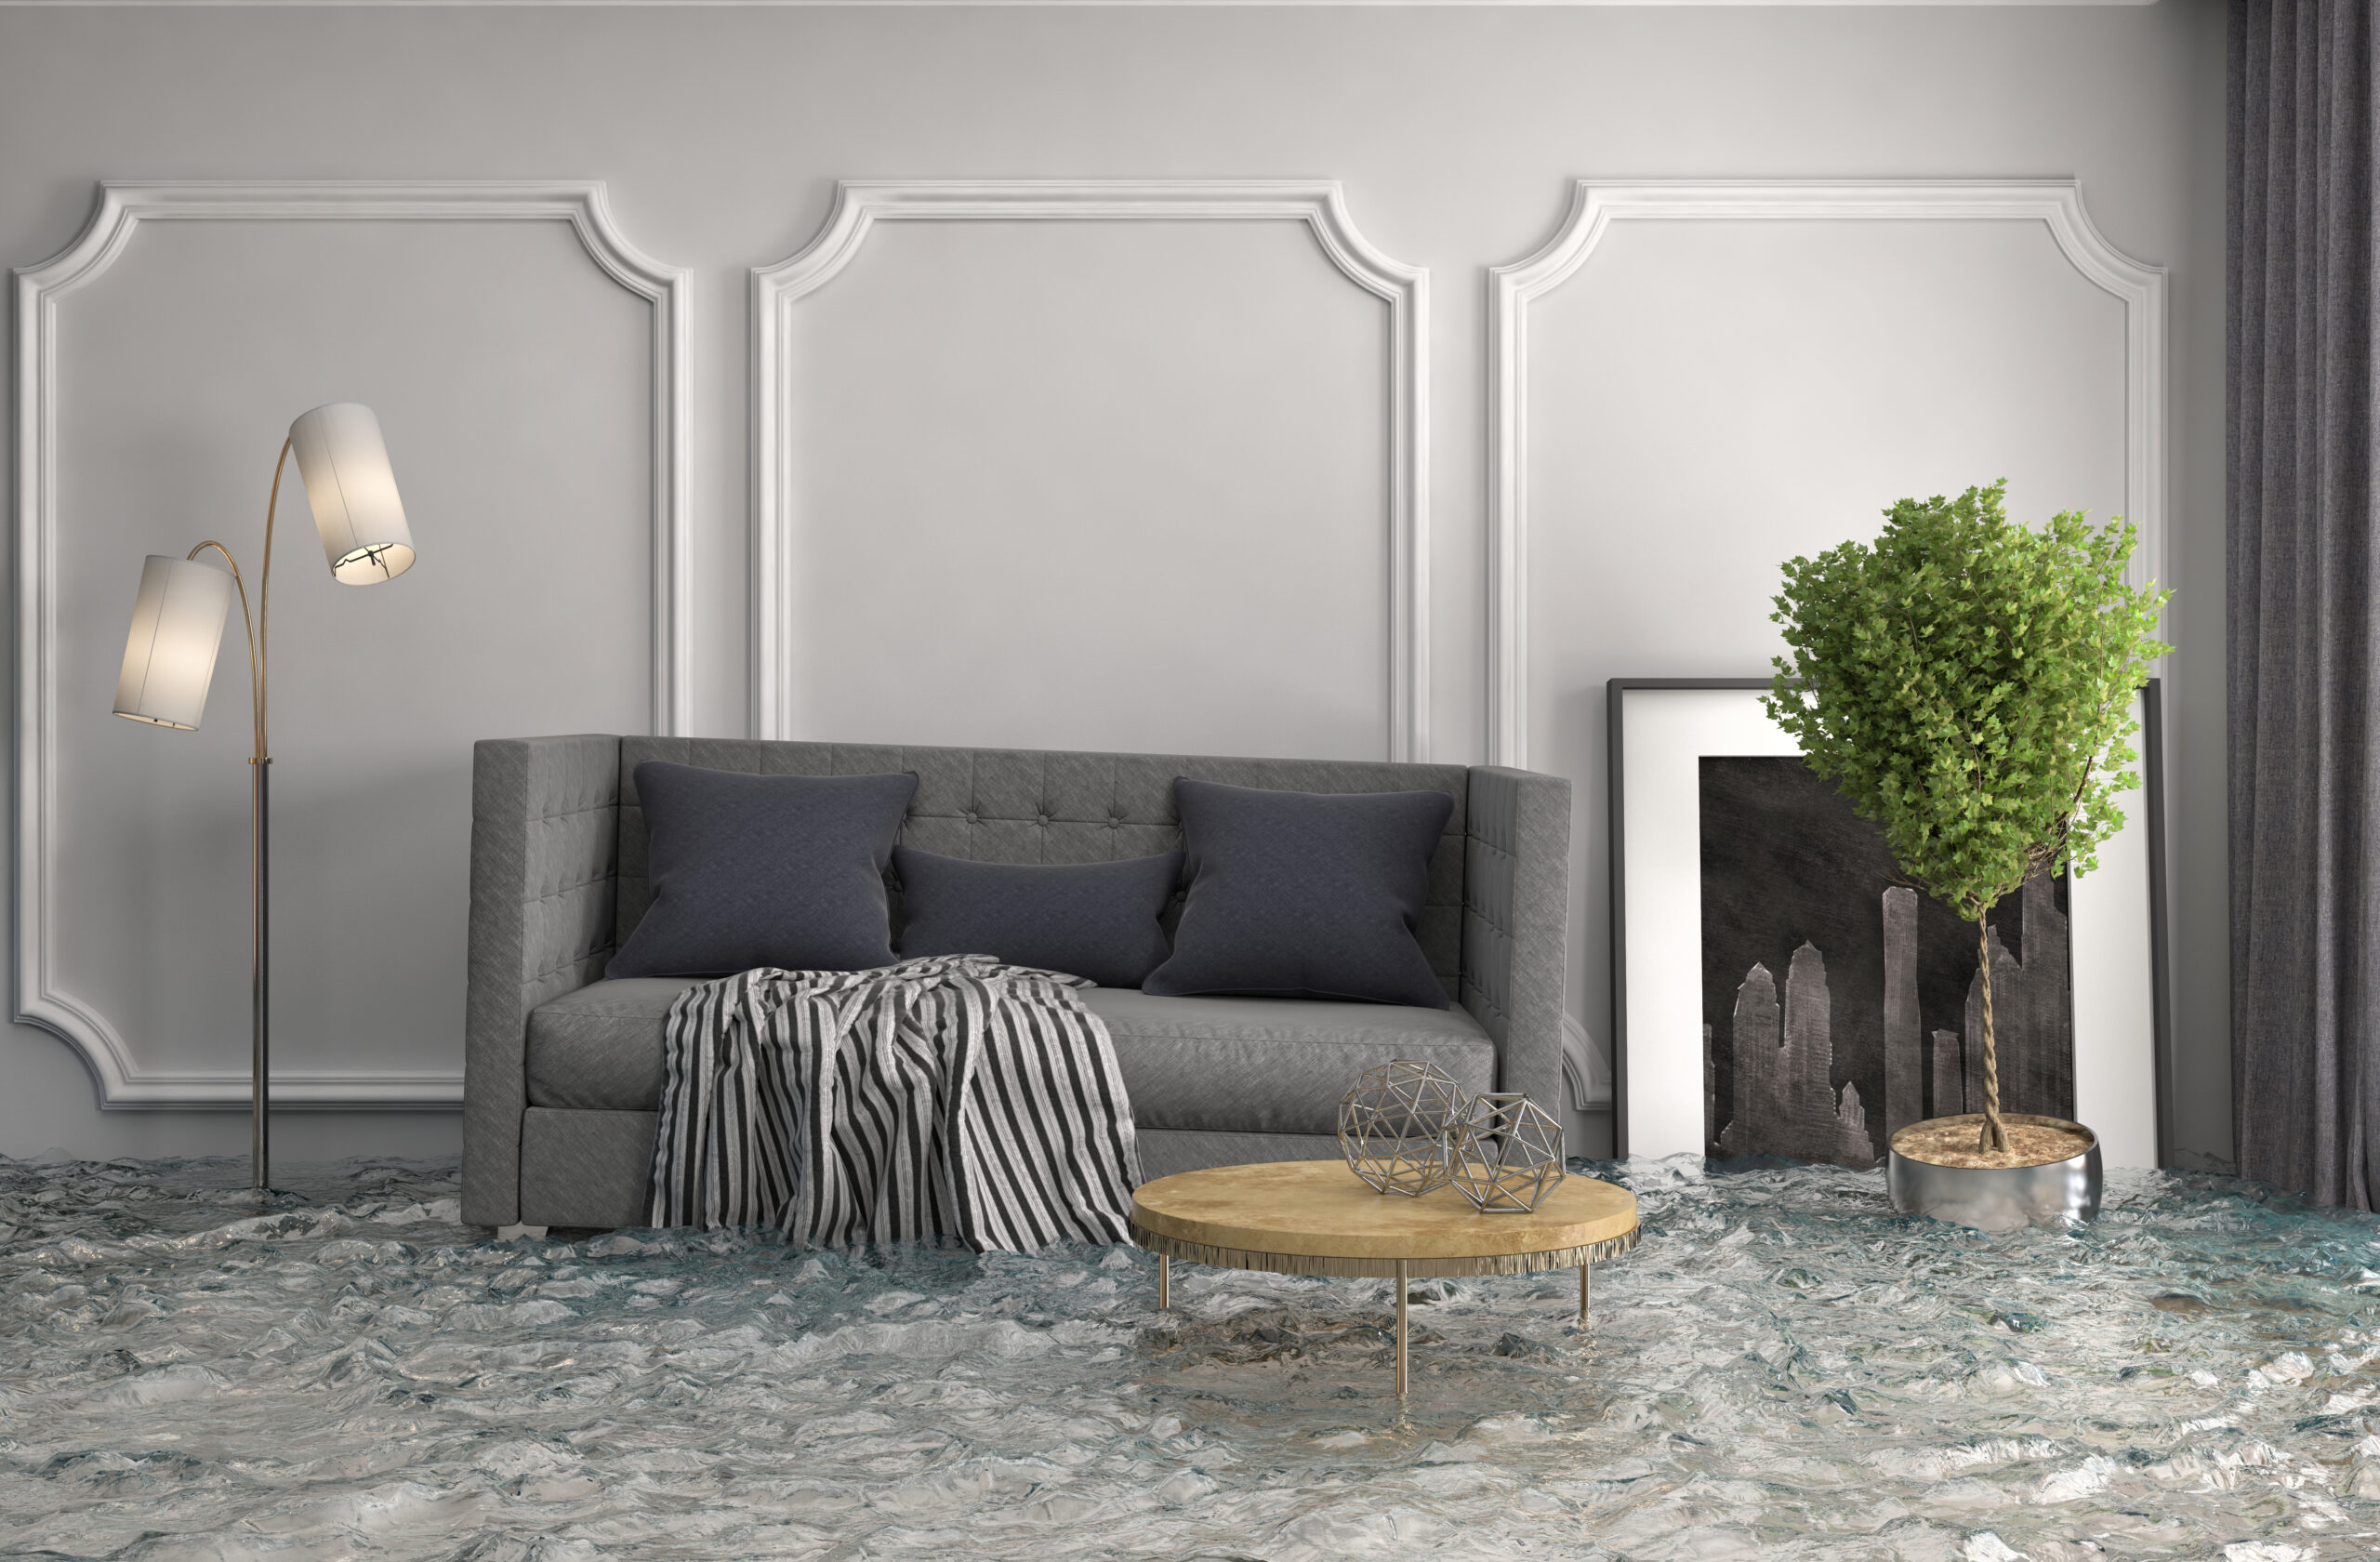 interior of the house flooded with water. 3d illustration